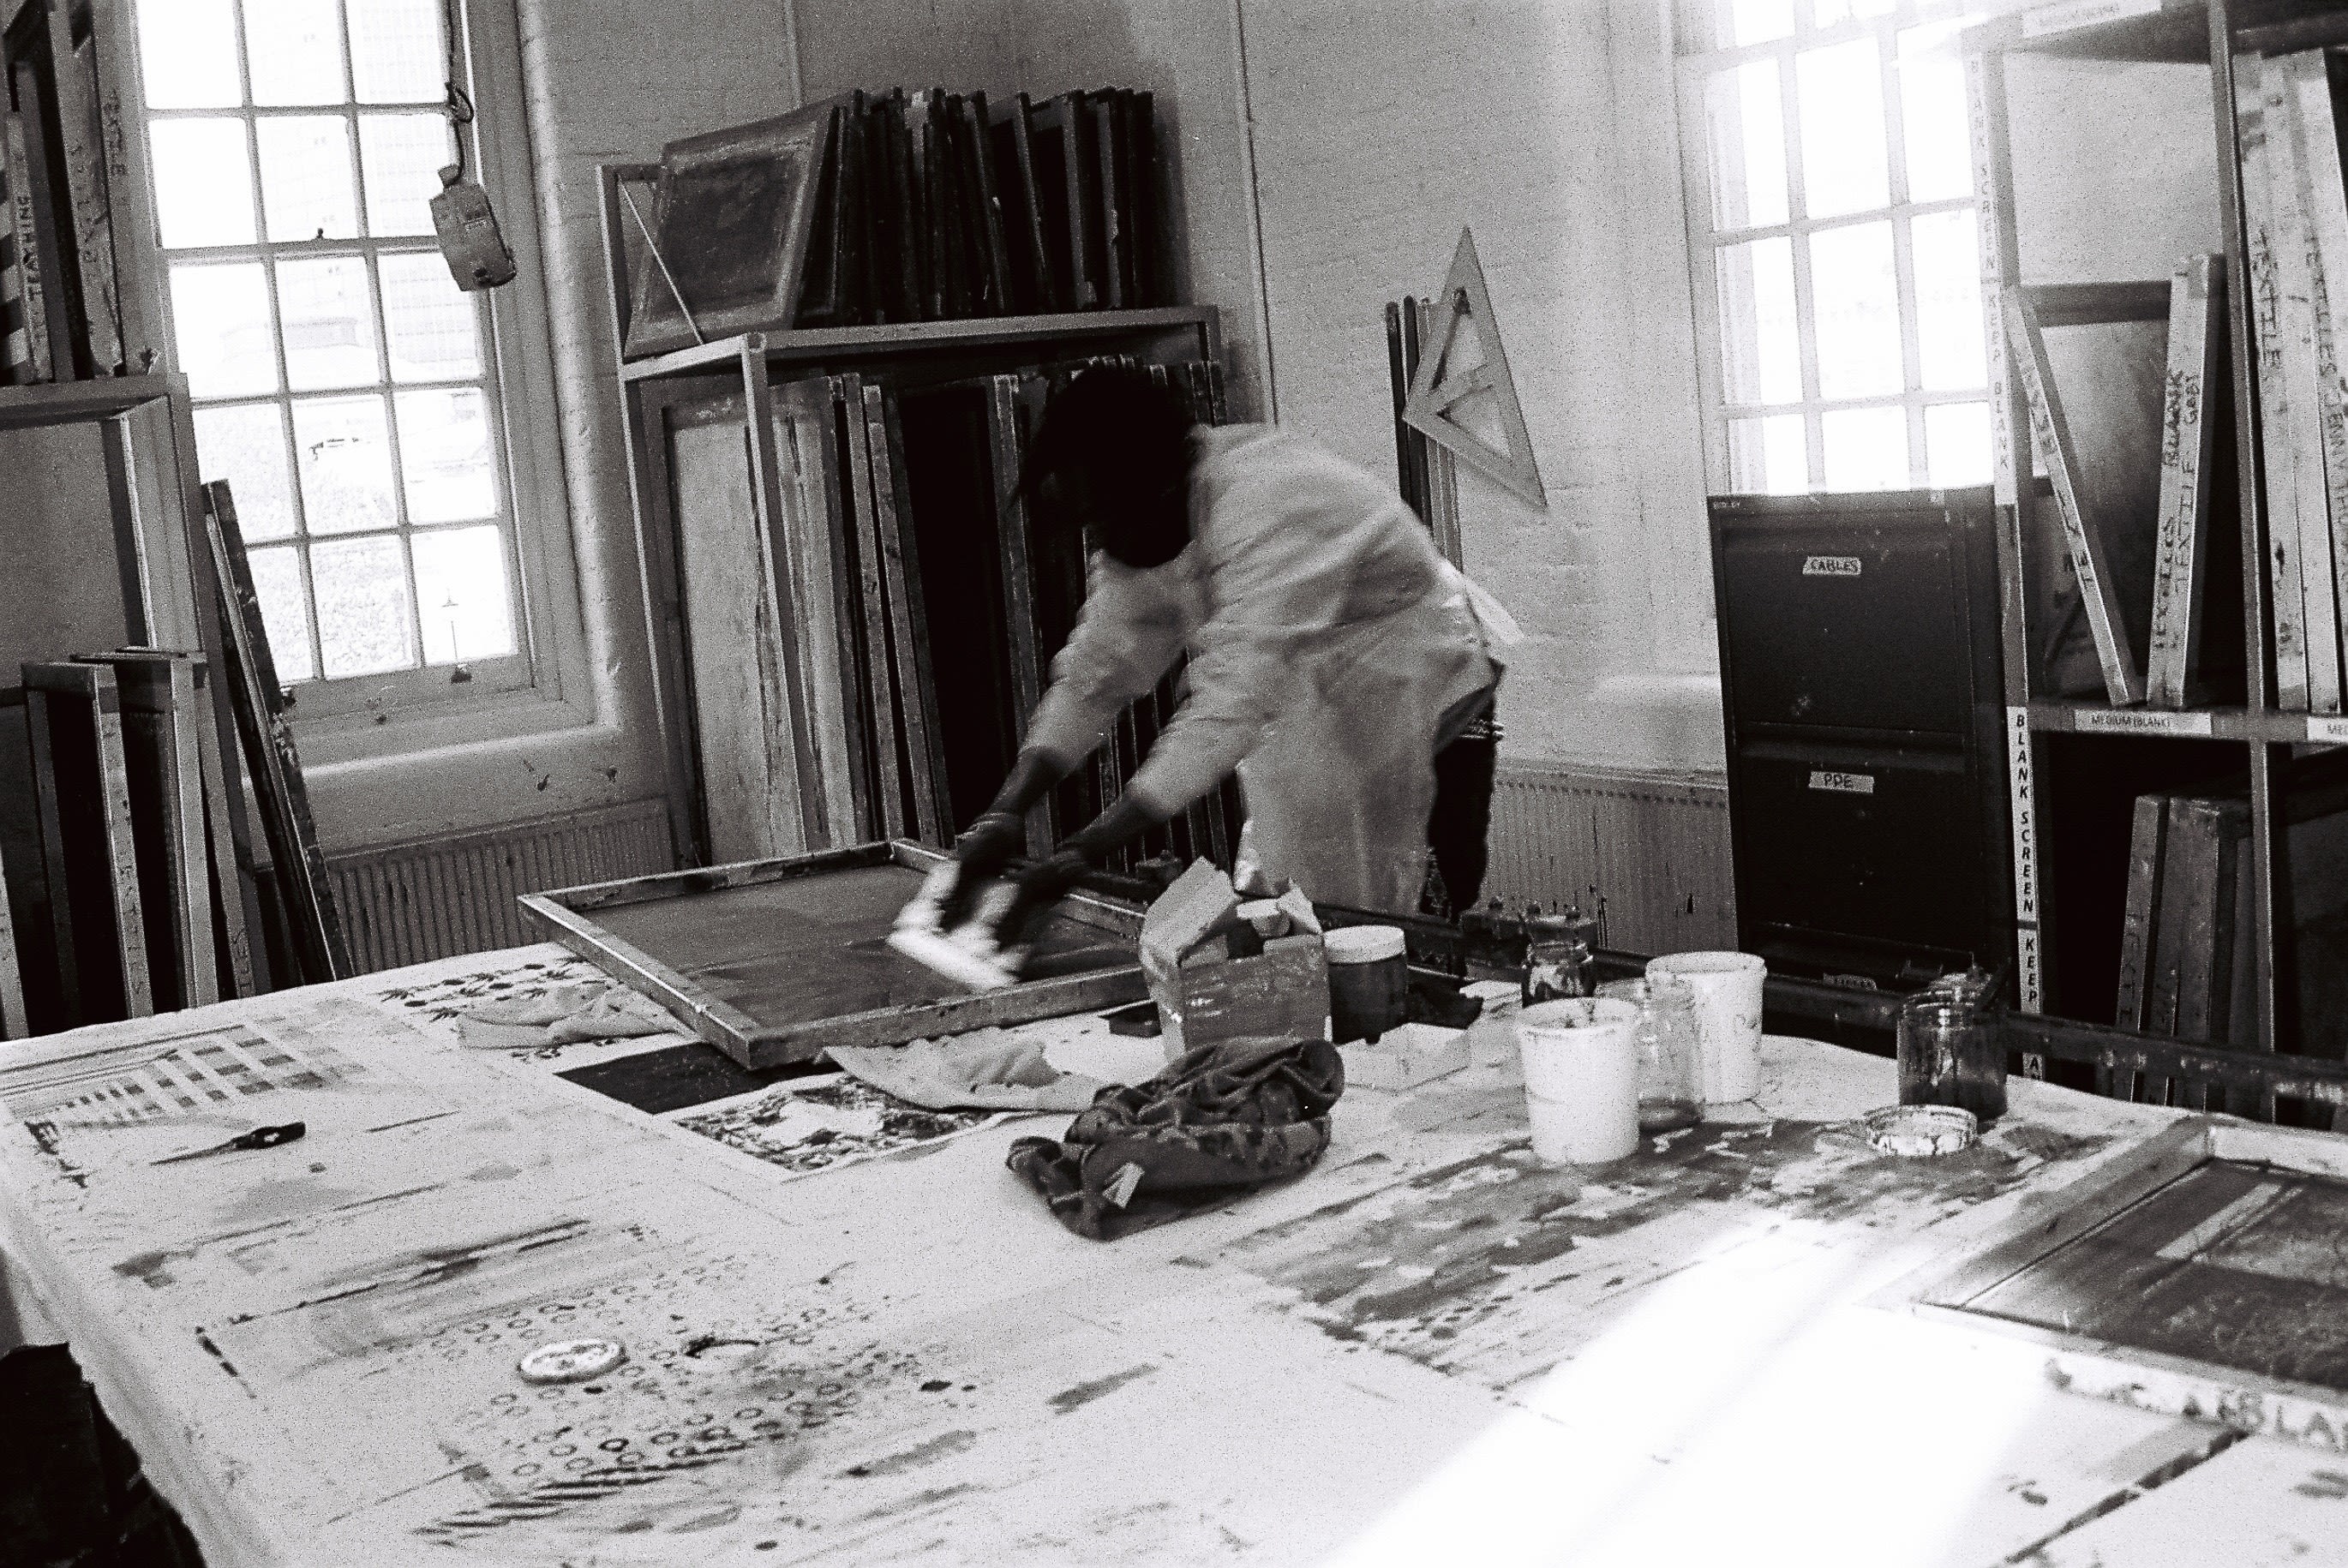 Image shows a person in a workshop Screenprinting work on a large table in front of them. In the background there are large windows 